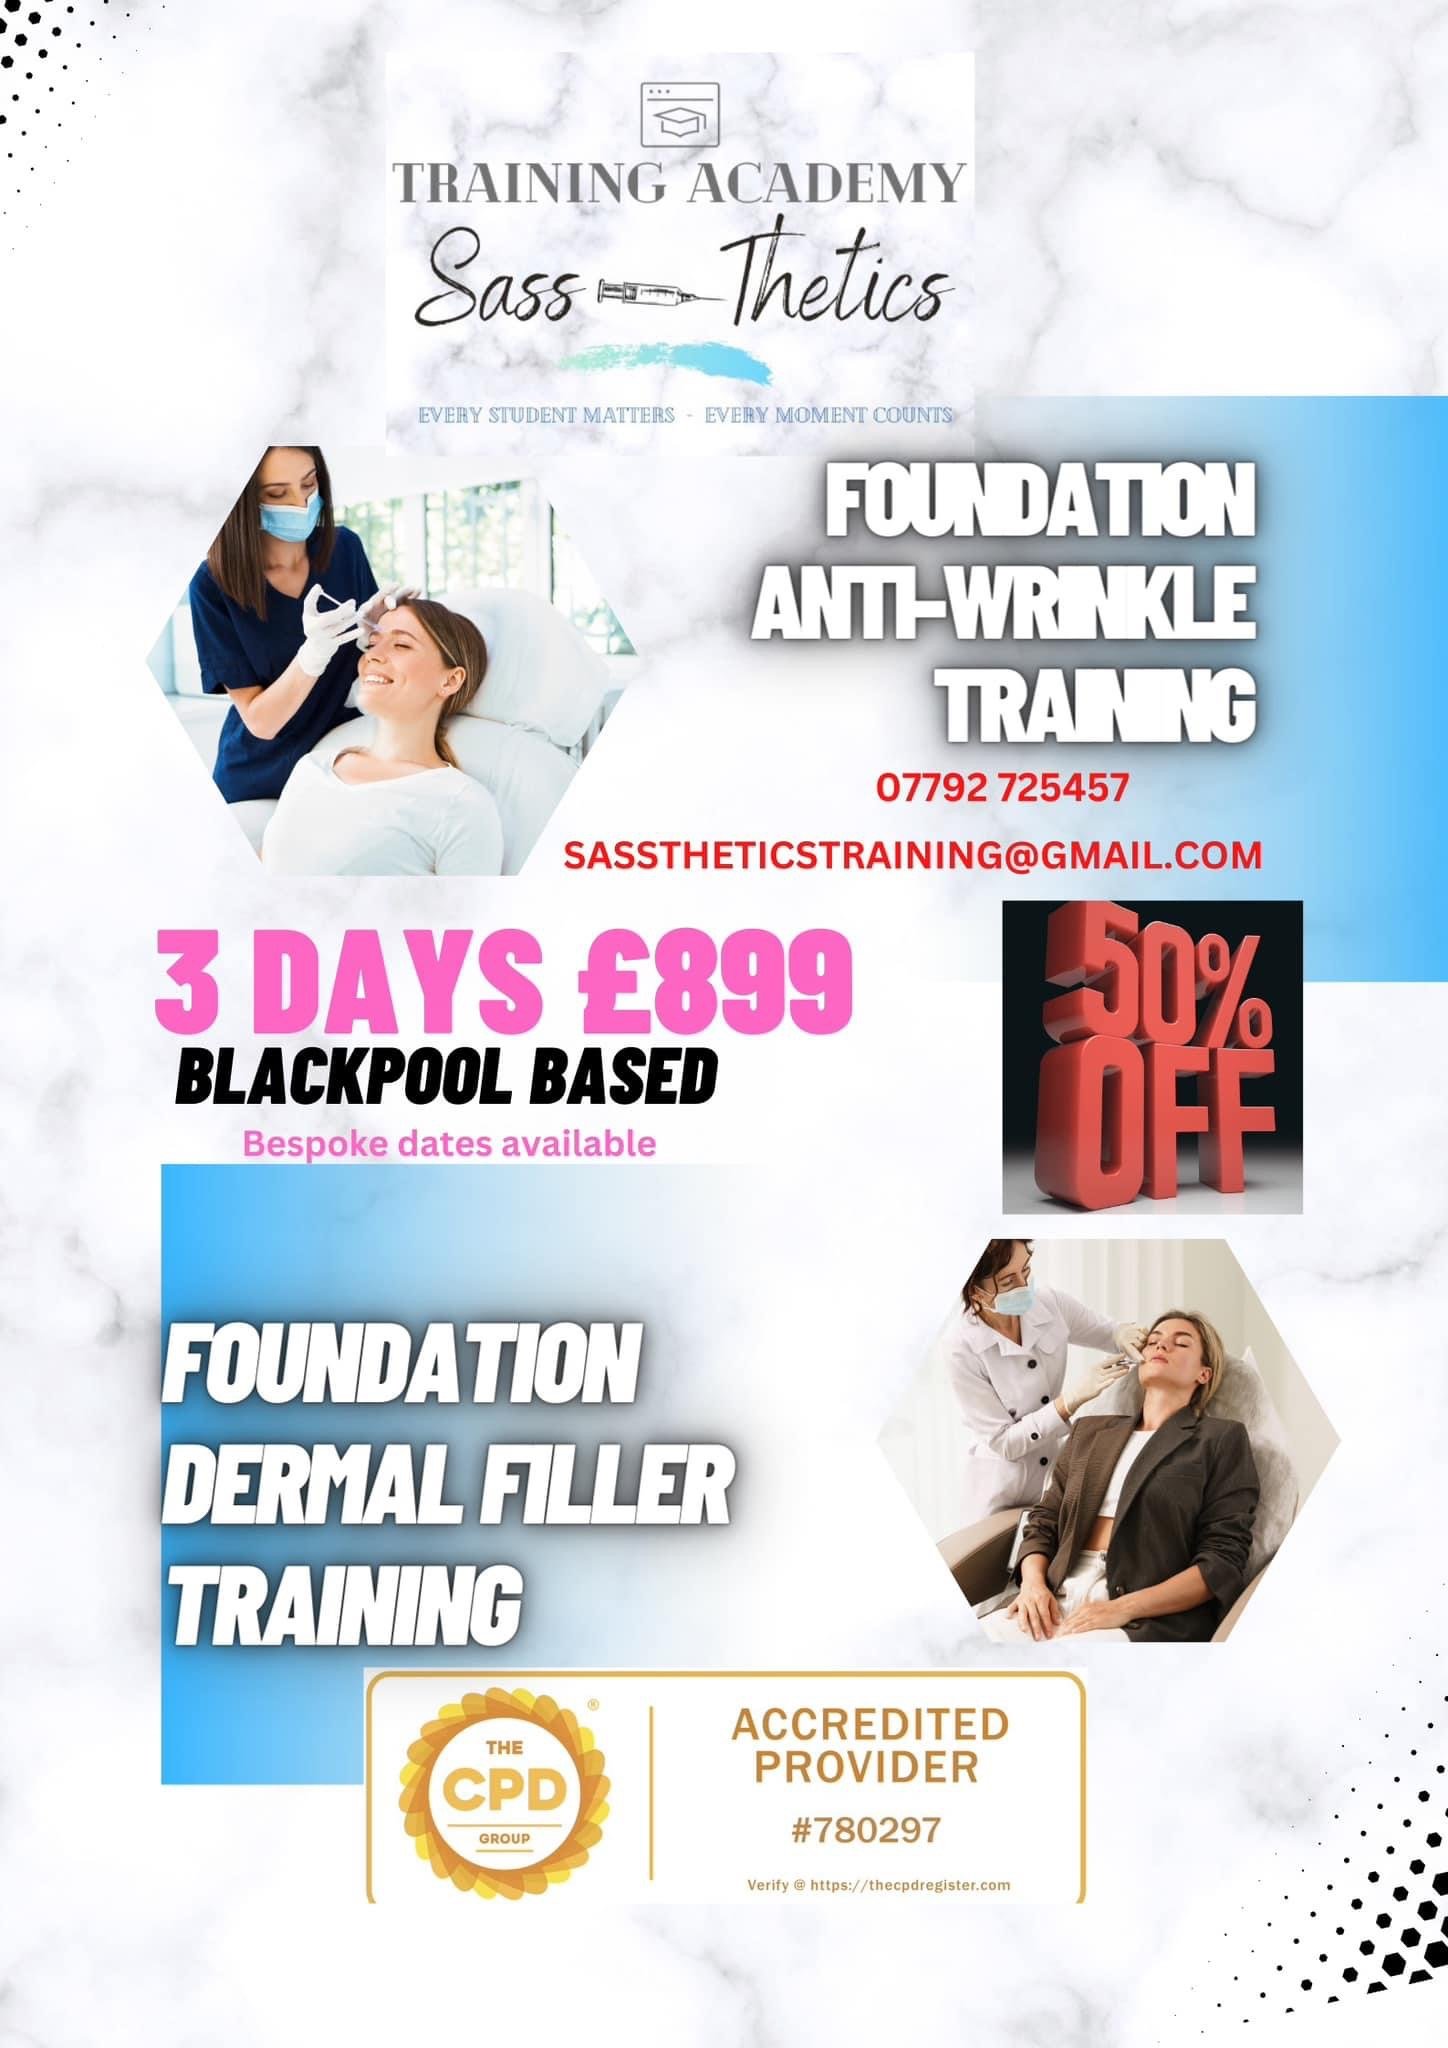 Foundation level Anti Wrinkle and Dermal Fillers Course -Choose your own dates .